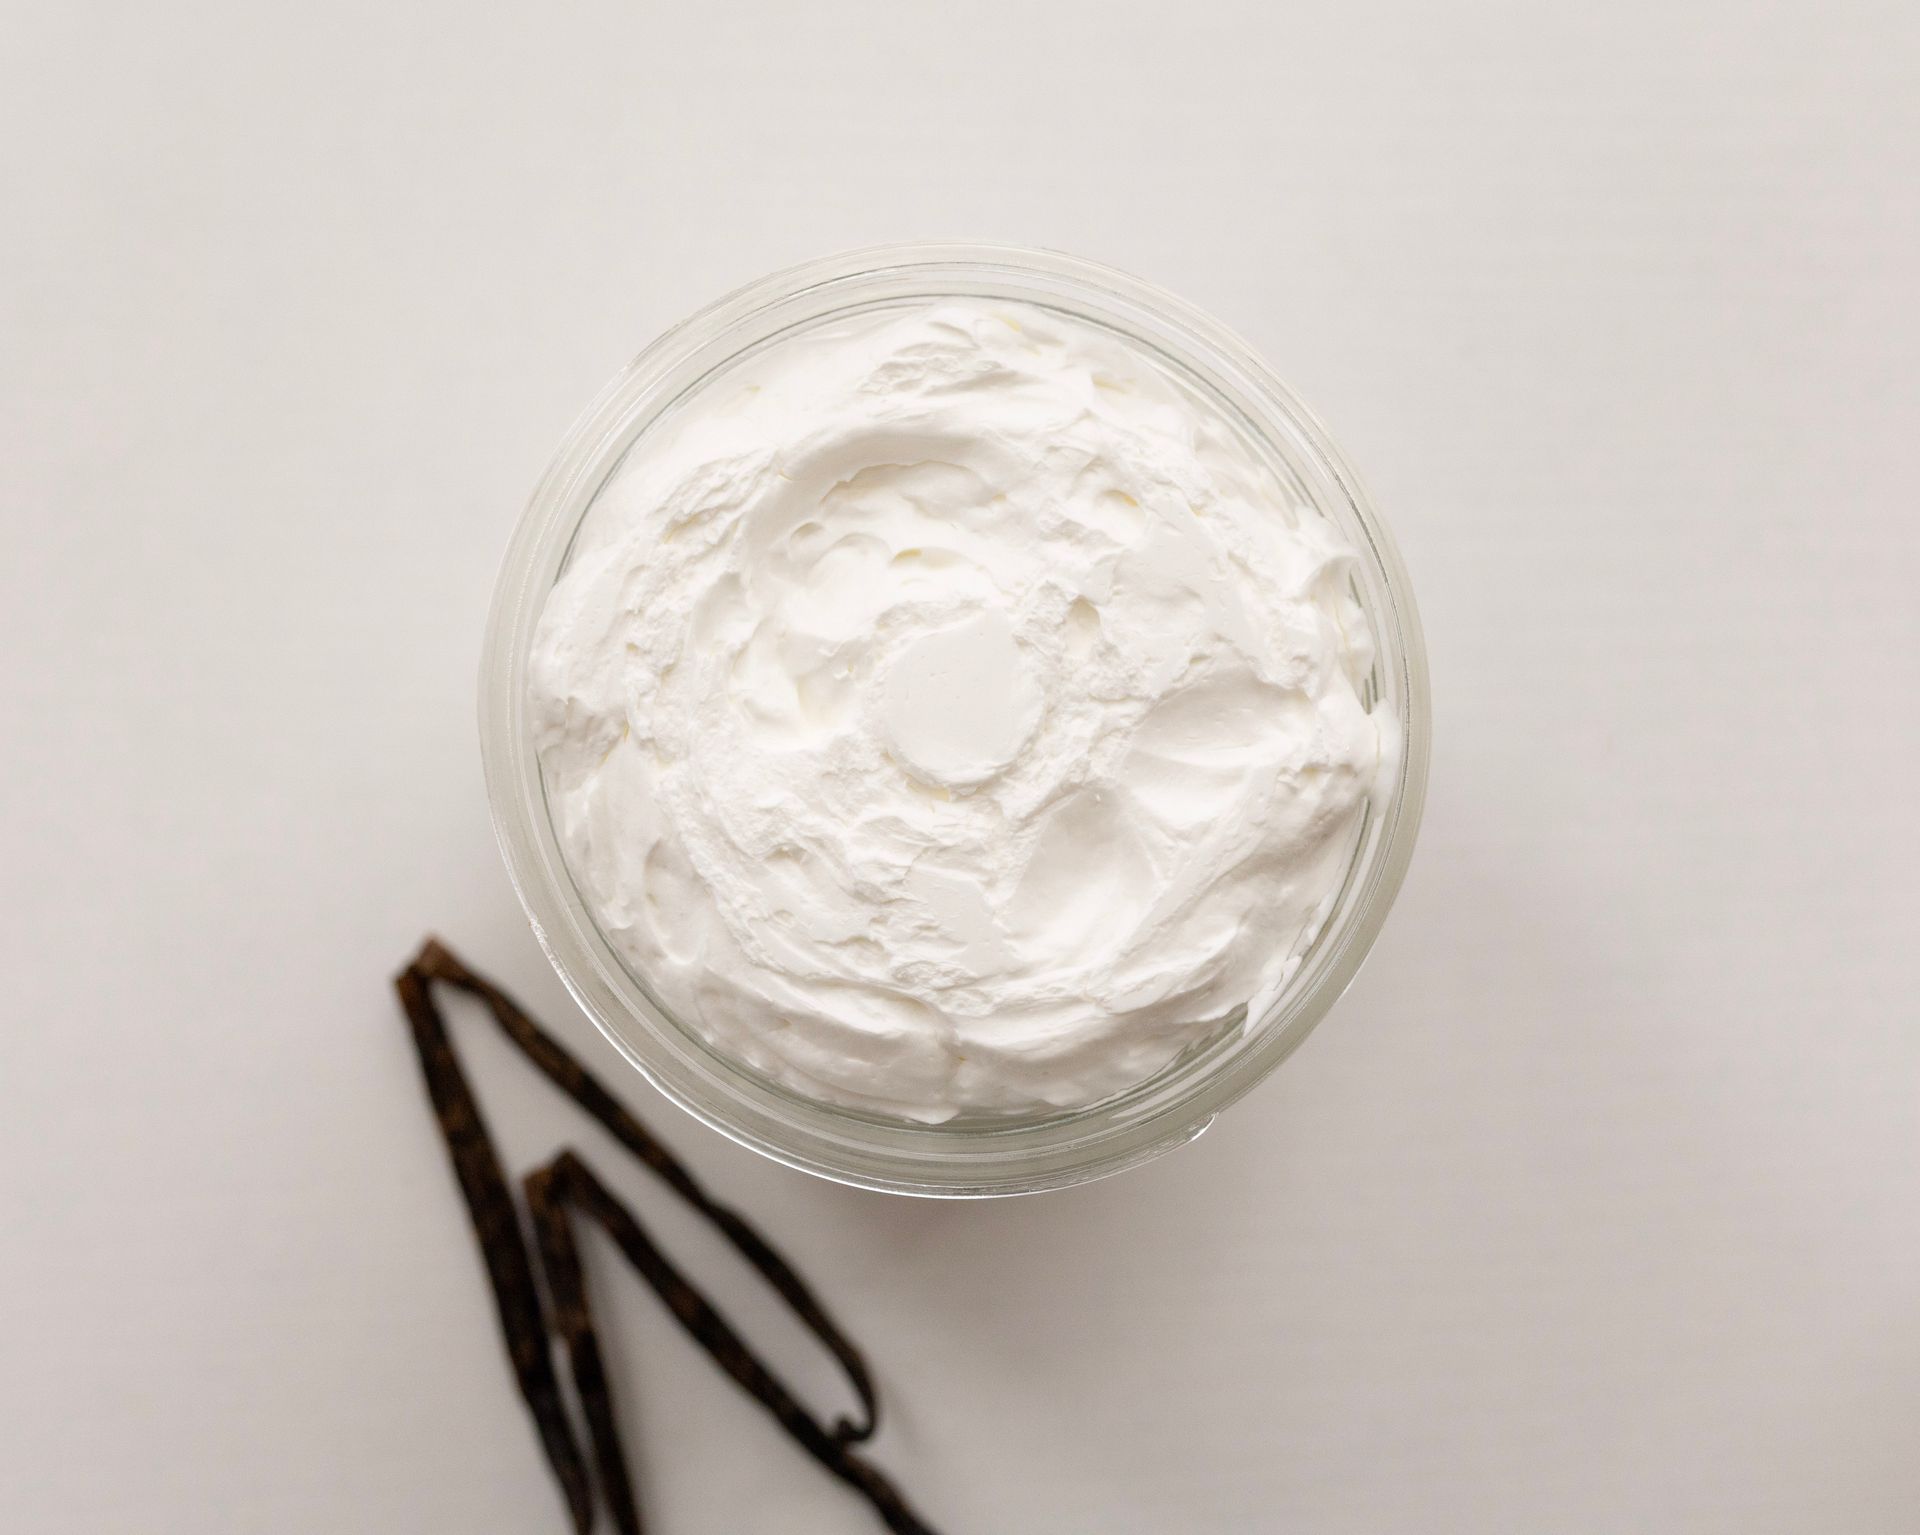 Whipped tallow face and body cream made by Allow Nourishment